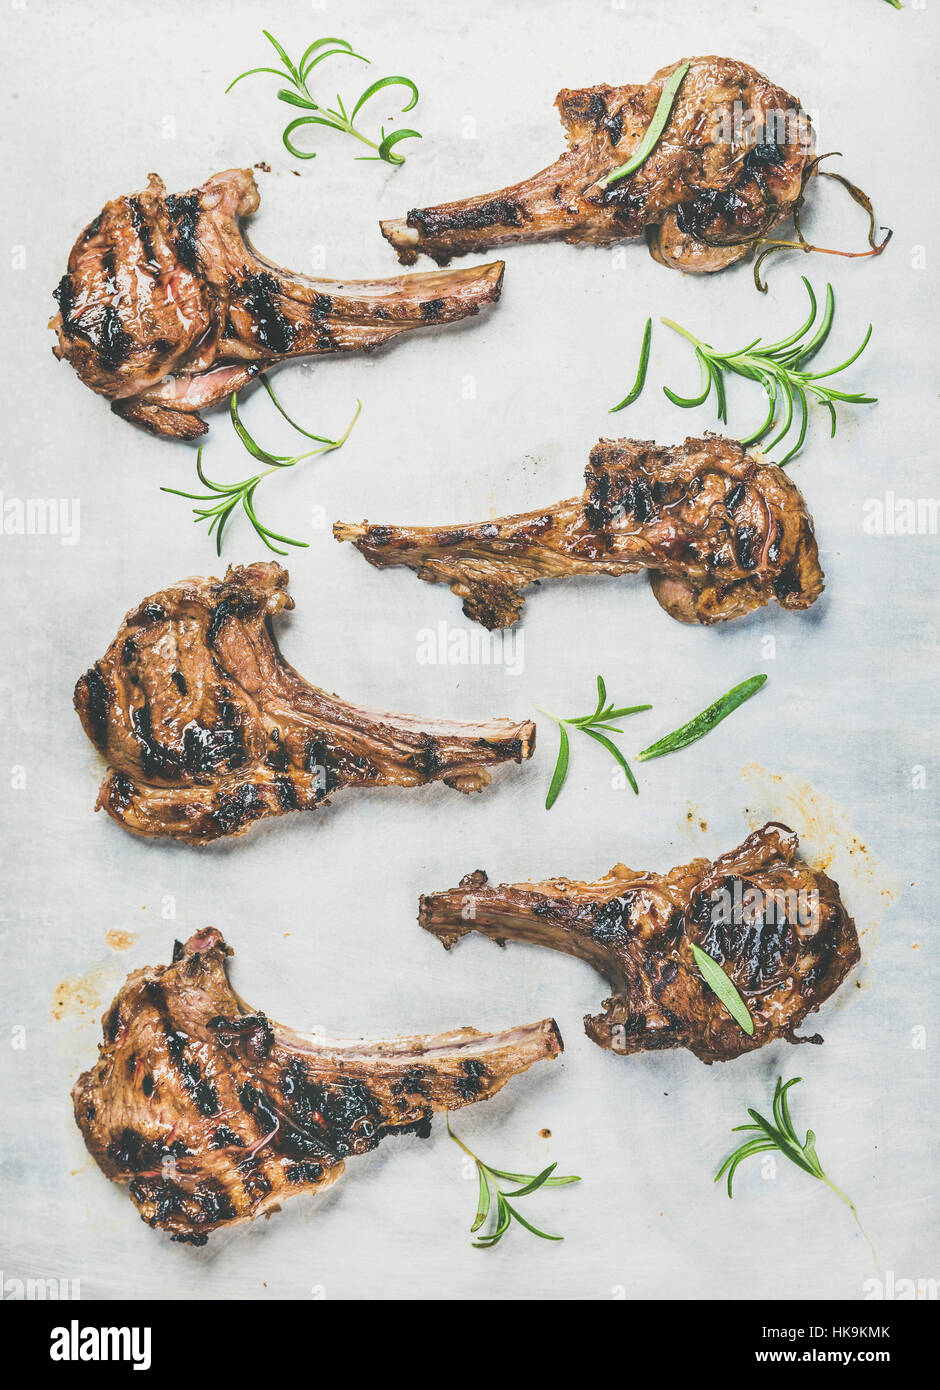 Grilled lamb ribs with fresh rosemary over metal baking tray background, top view, vertical composition. Meat barbecue and slow food concept Stock Photo